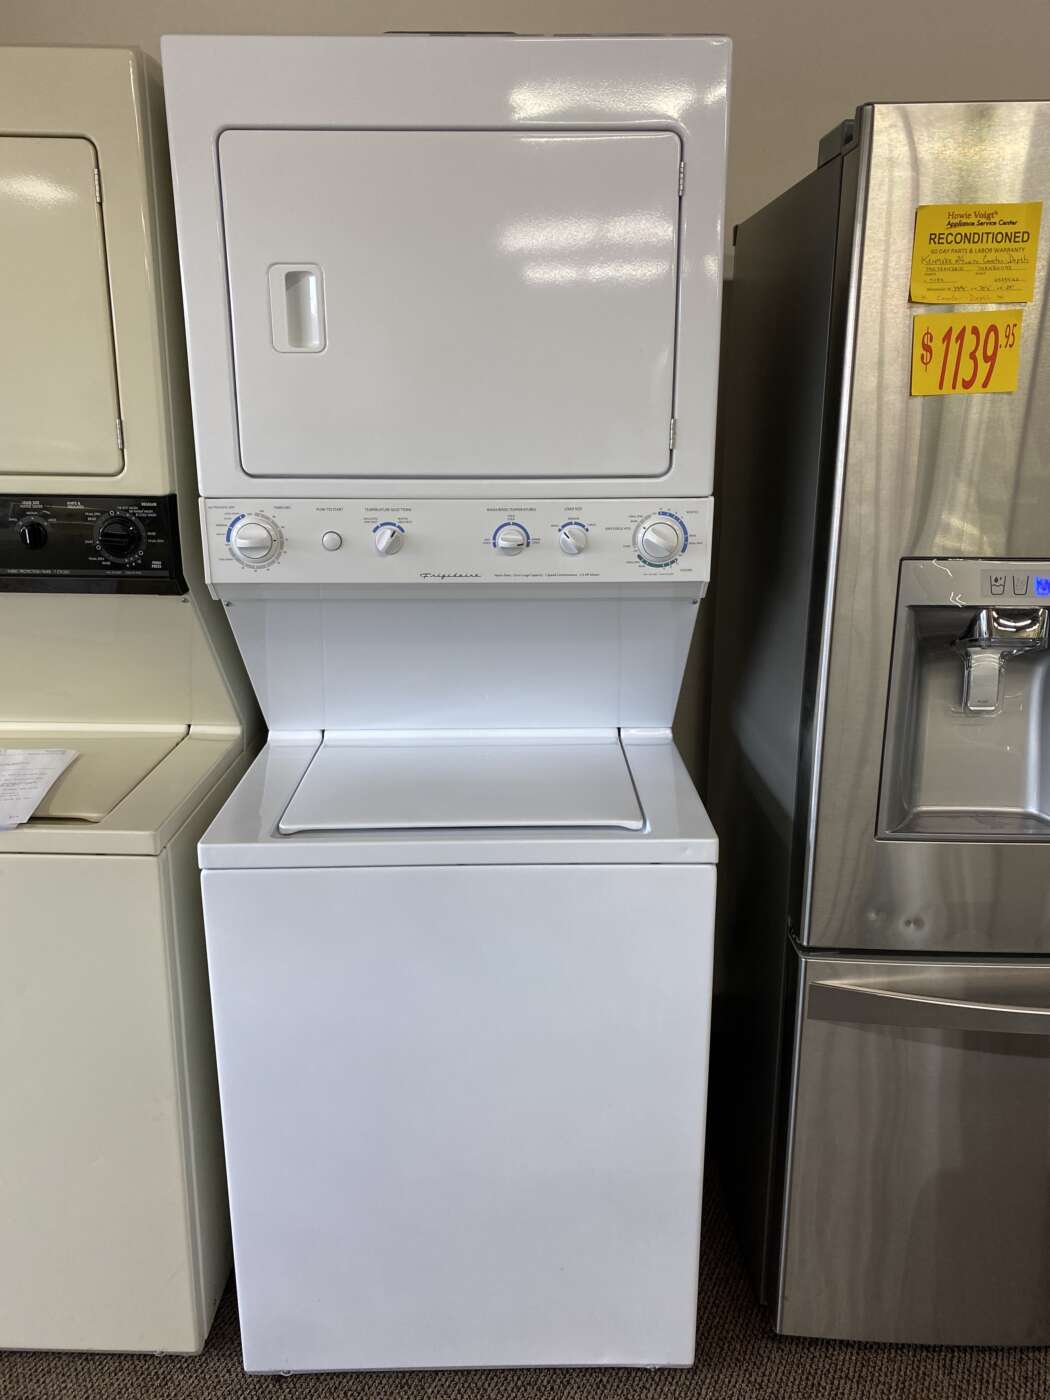 Reconditioned FRIGIDAIRE 2.7 Cu. Ft. Top-Load Washer & 5.7 Cu. Ft. Electric Dryer – White